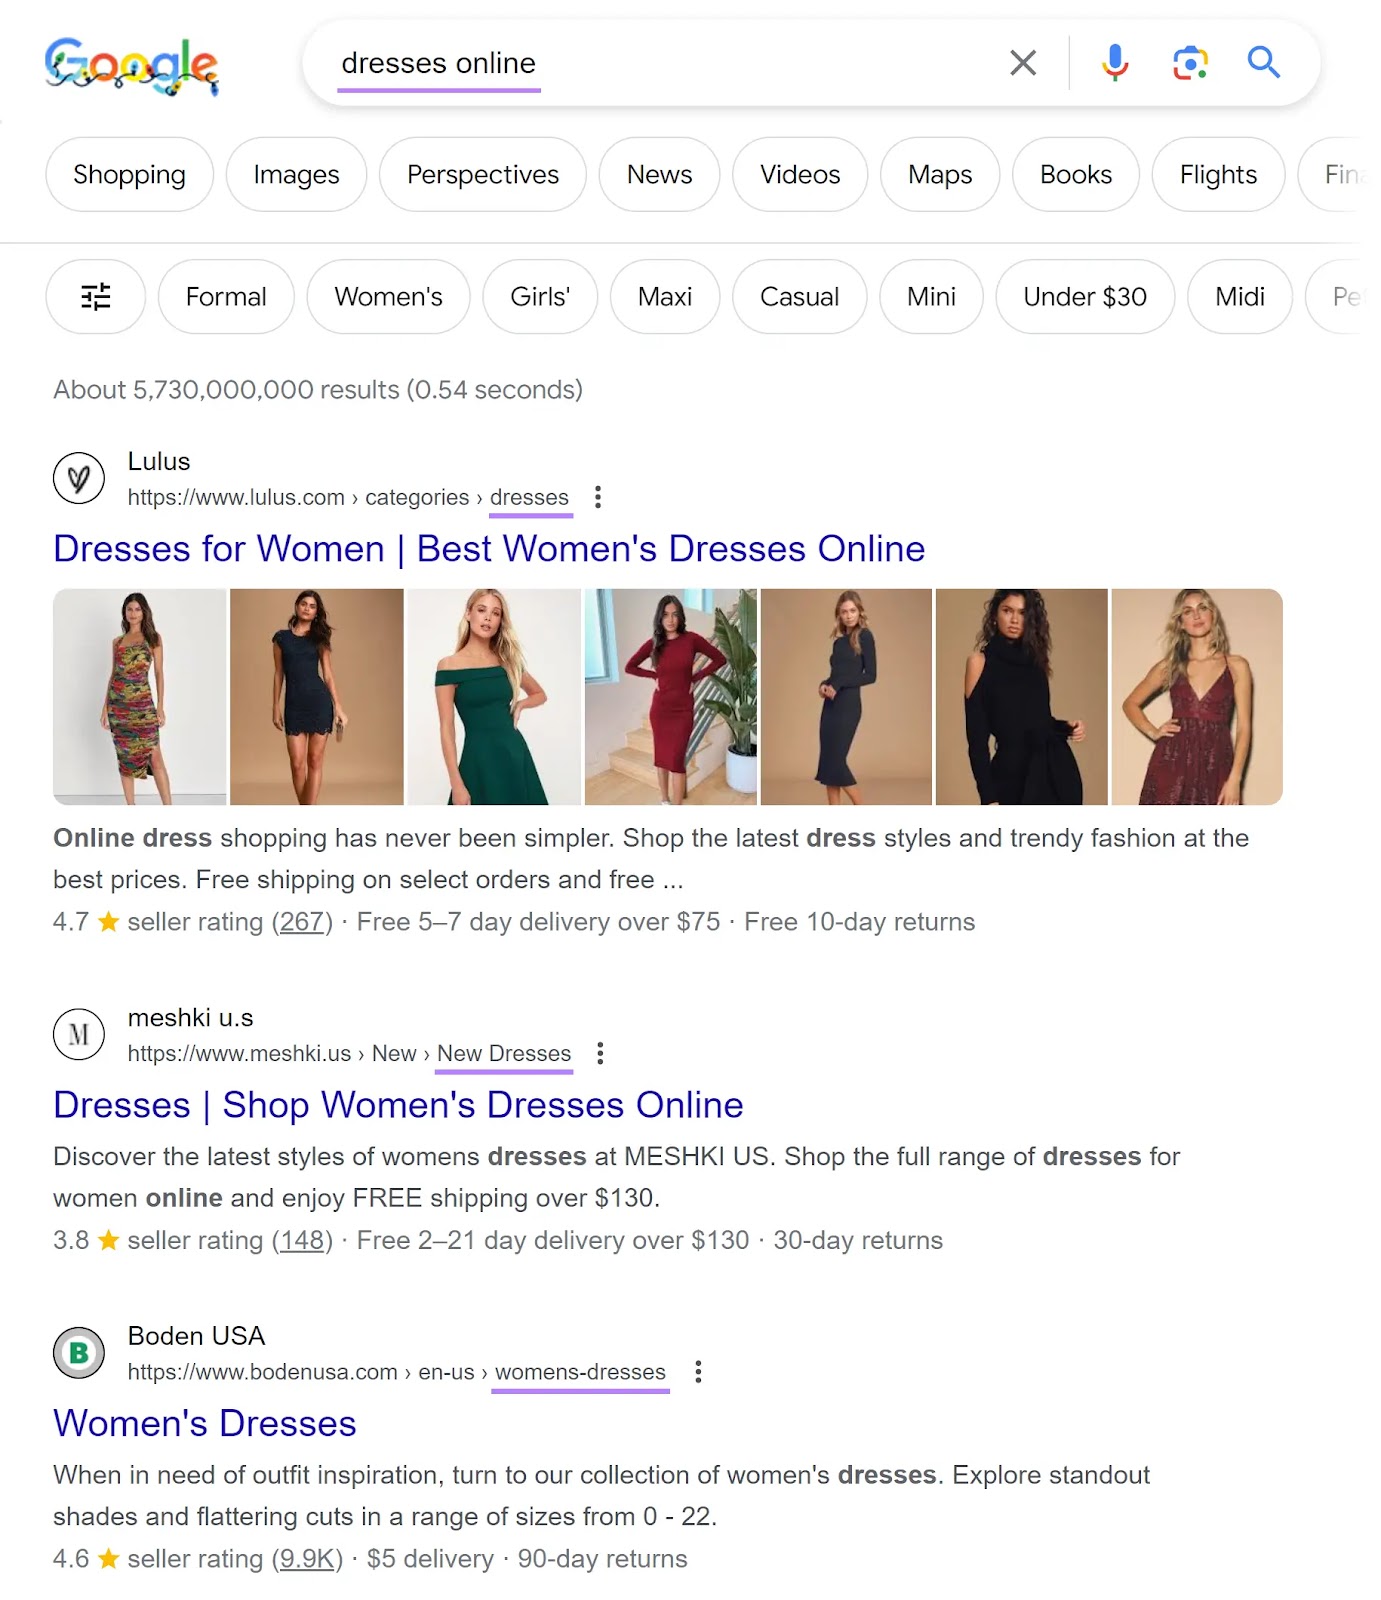 Google's SERP for "dresses online" with ecommerce category pages highlighted in the results